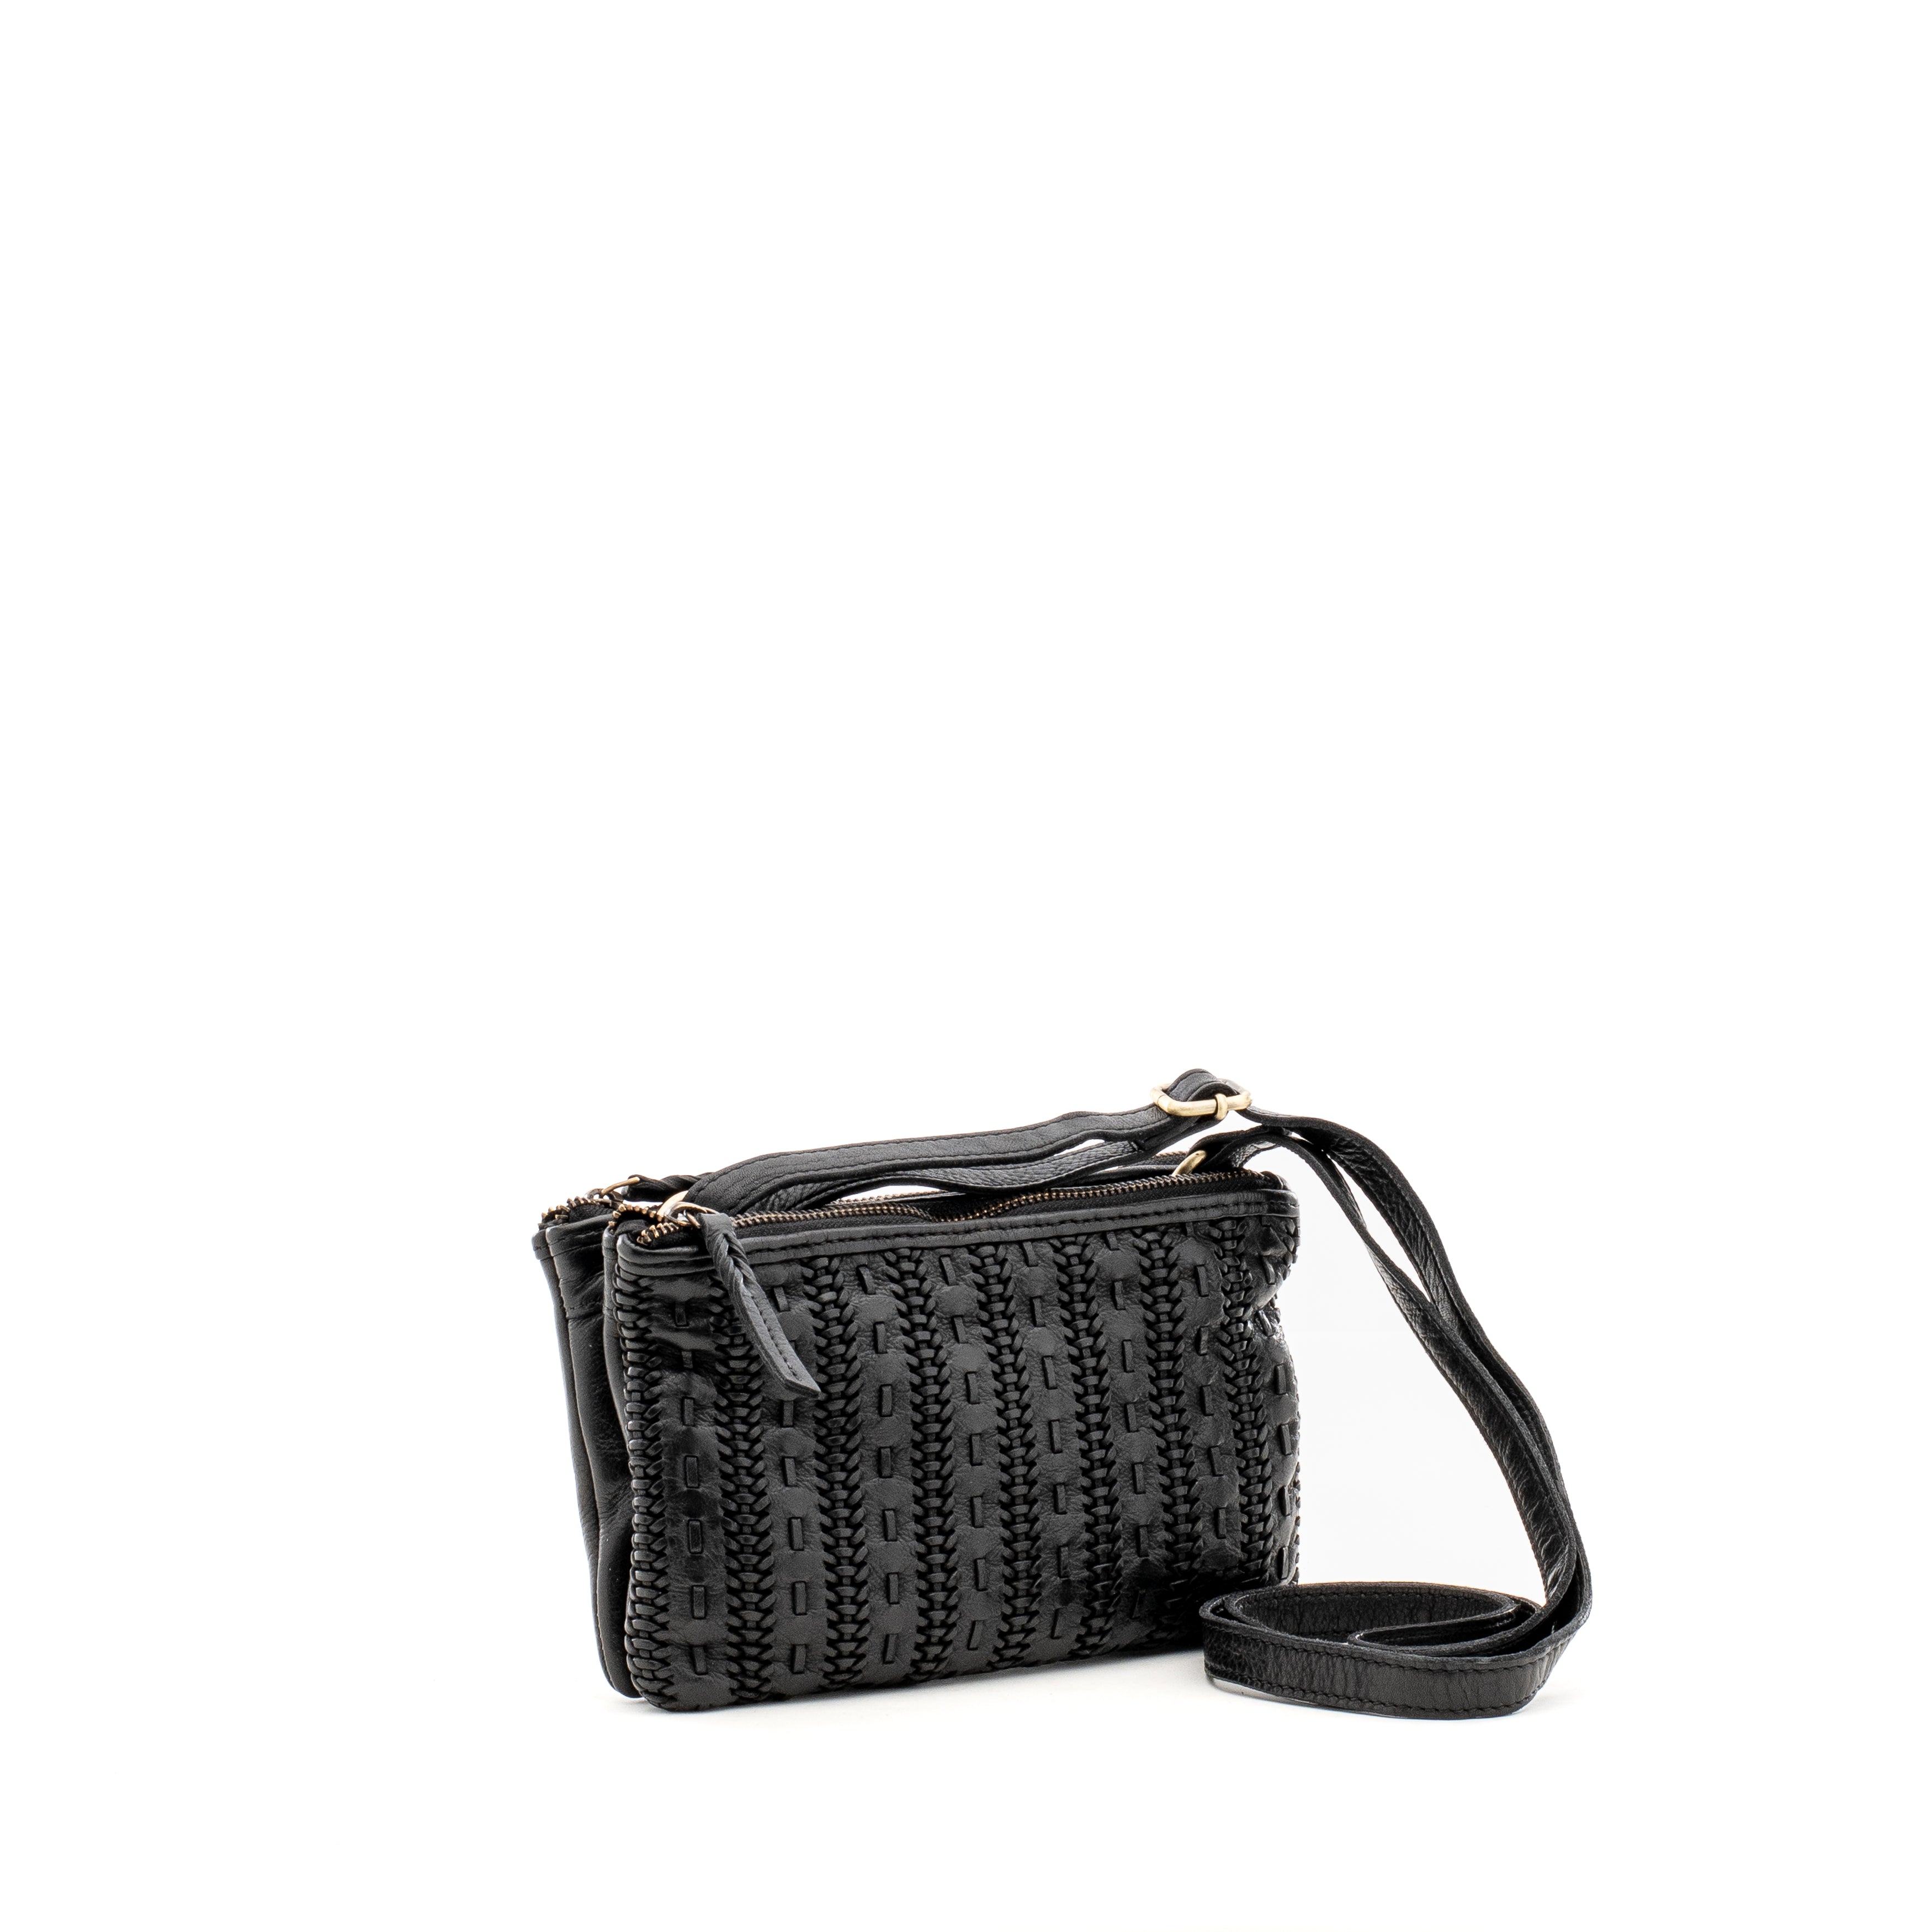 Black woven crossbody bag with adjustable strap